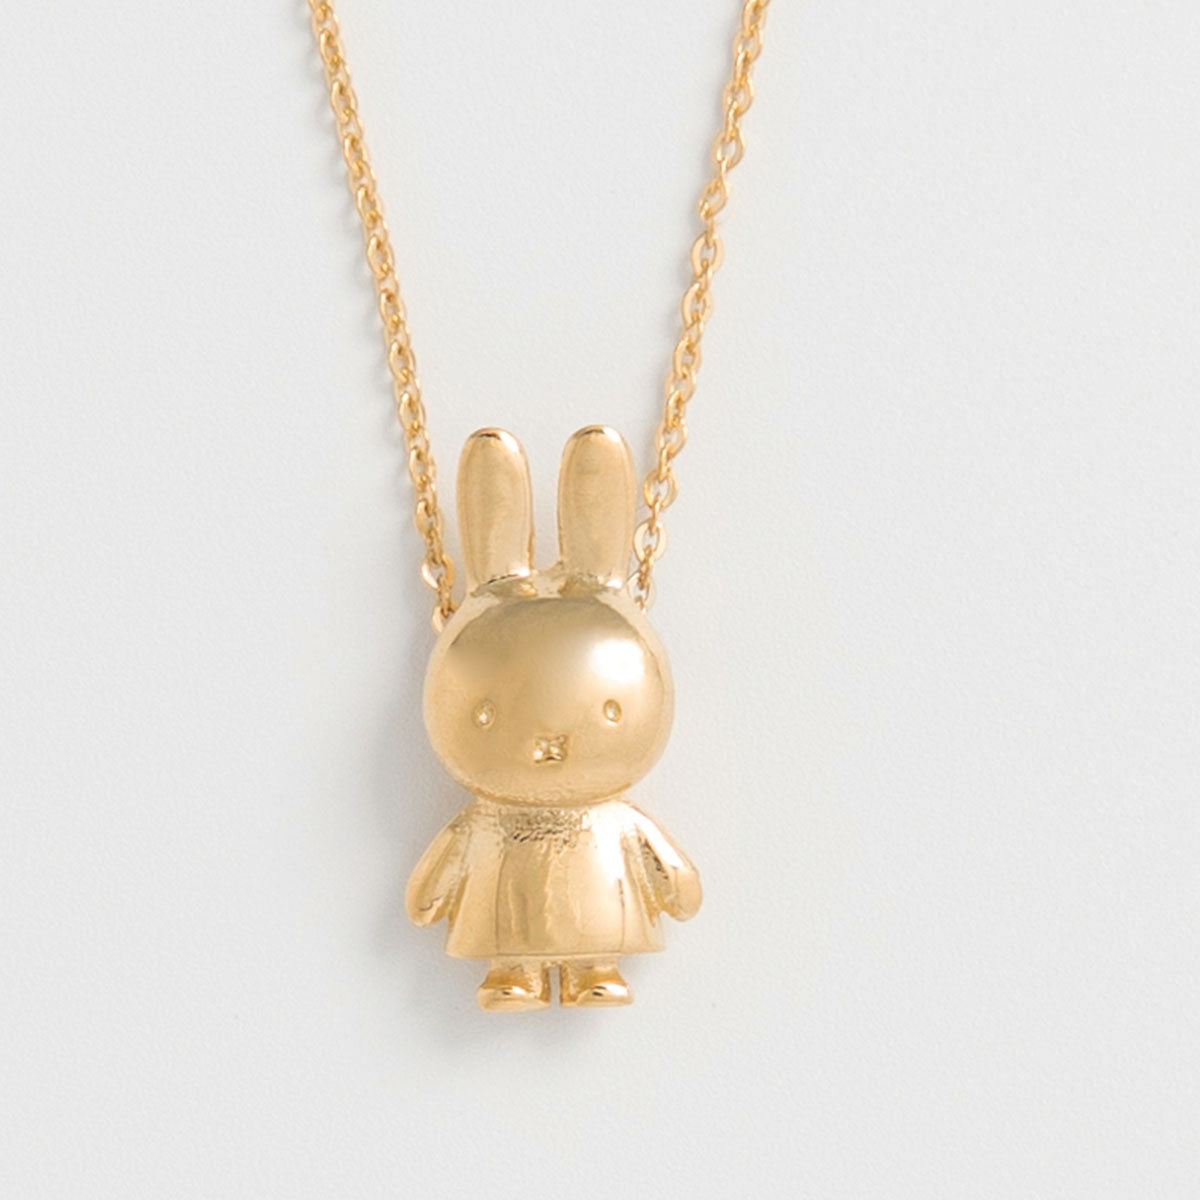 Miffy Body Charm Necklace (18ct Gold Vermeil)